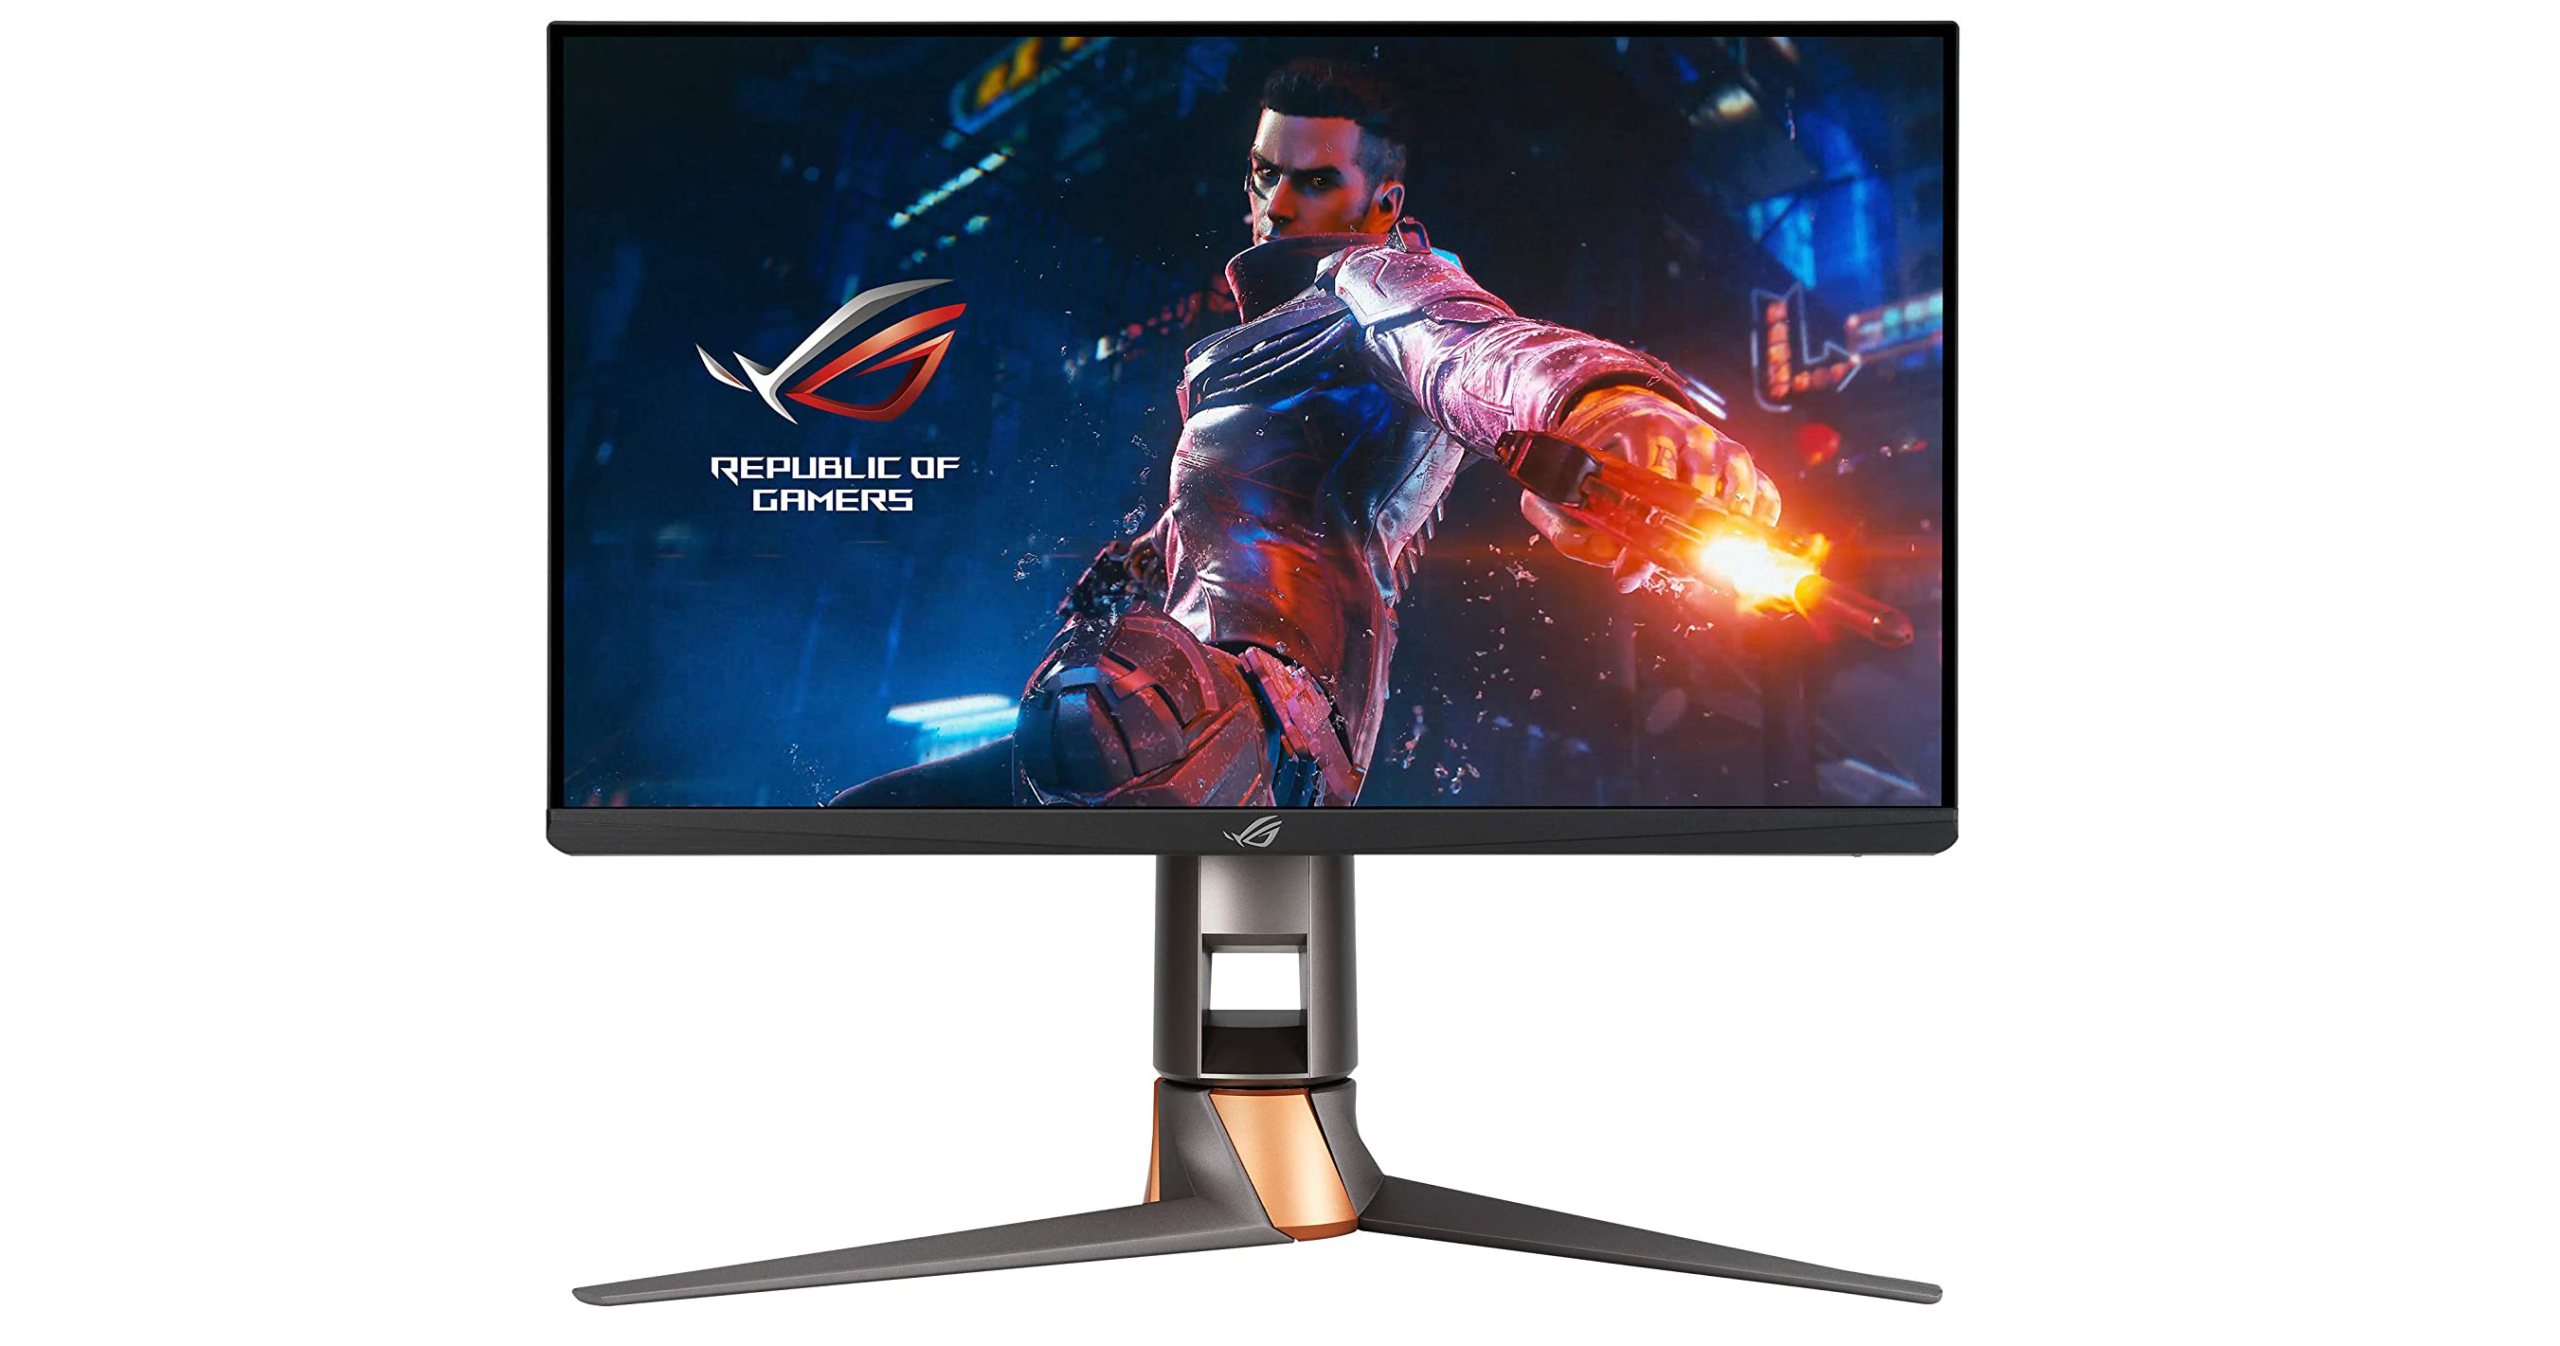 CES 2020: Asus announces ROG gaming monitors with 360Hz screen, G-SYNC tech